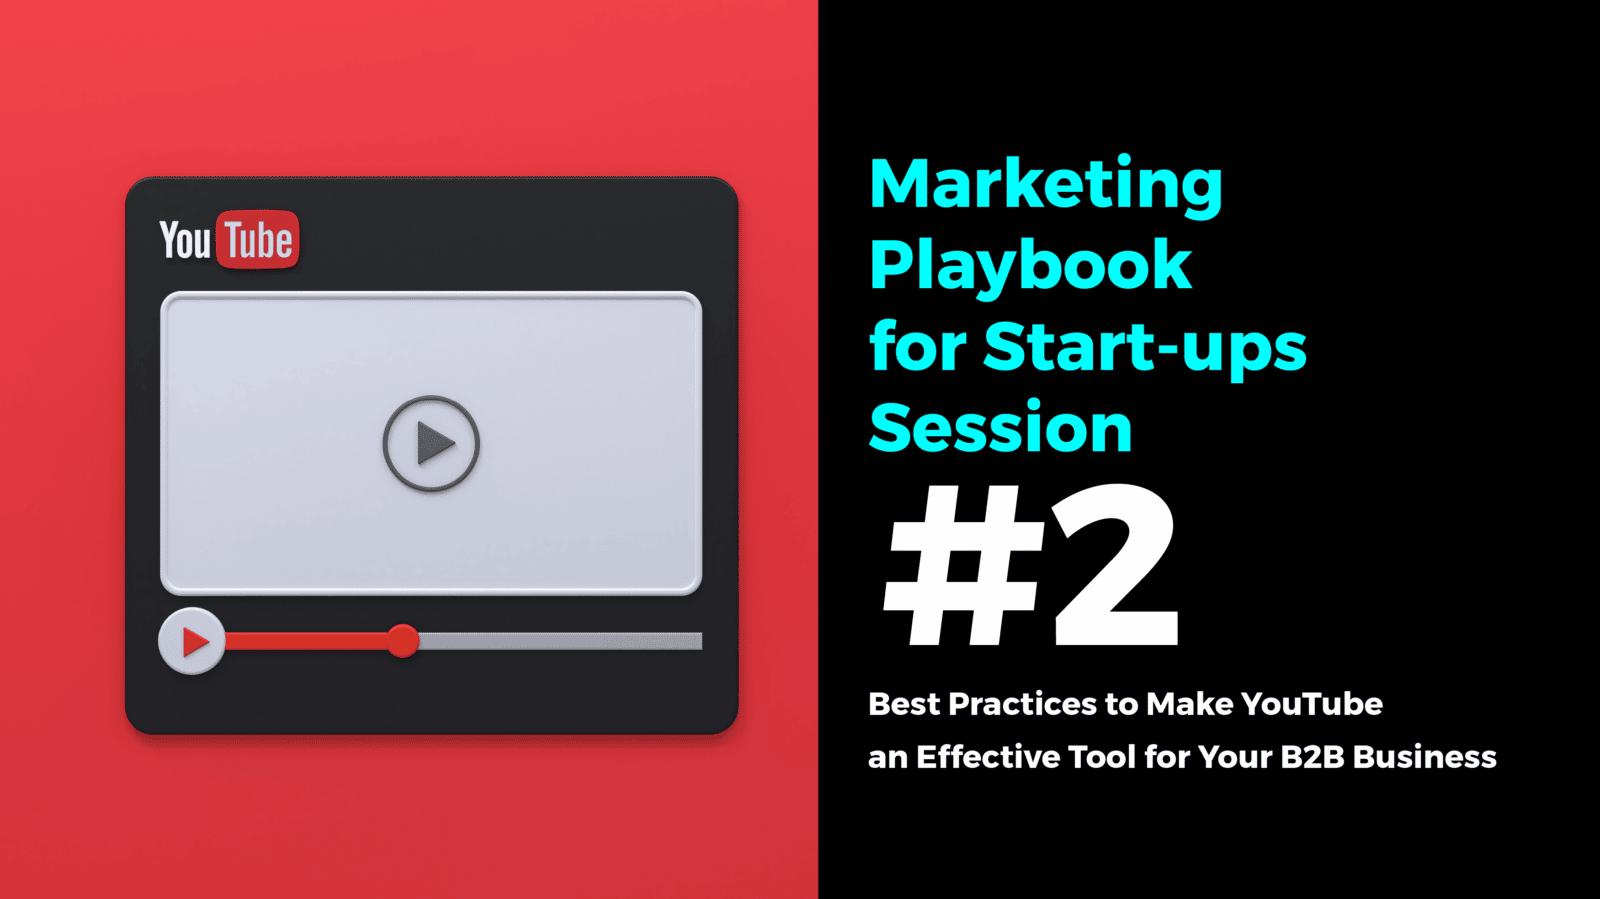 Marketing Playbook for Start-ups Session #2 – Best Practices to Make YouTube an Effective Tool for Your B2B Business